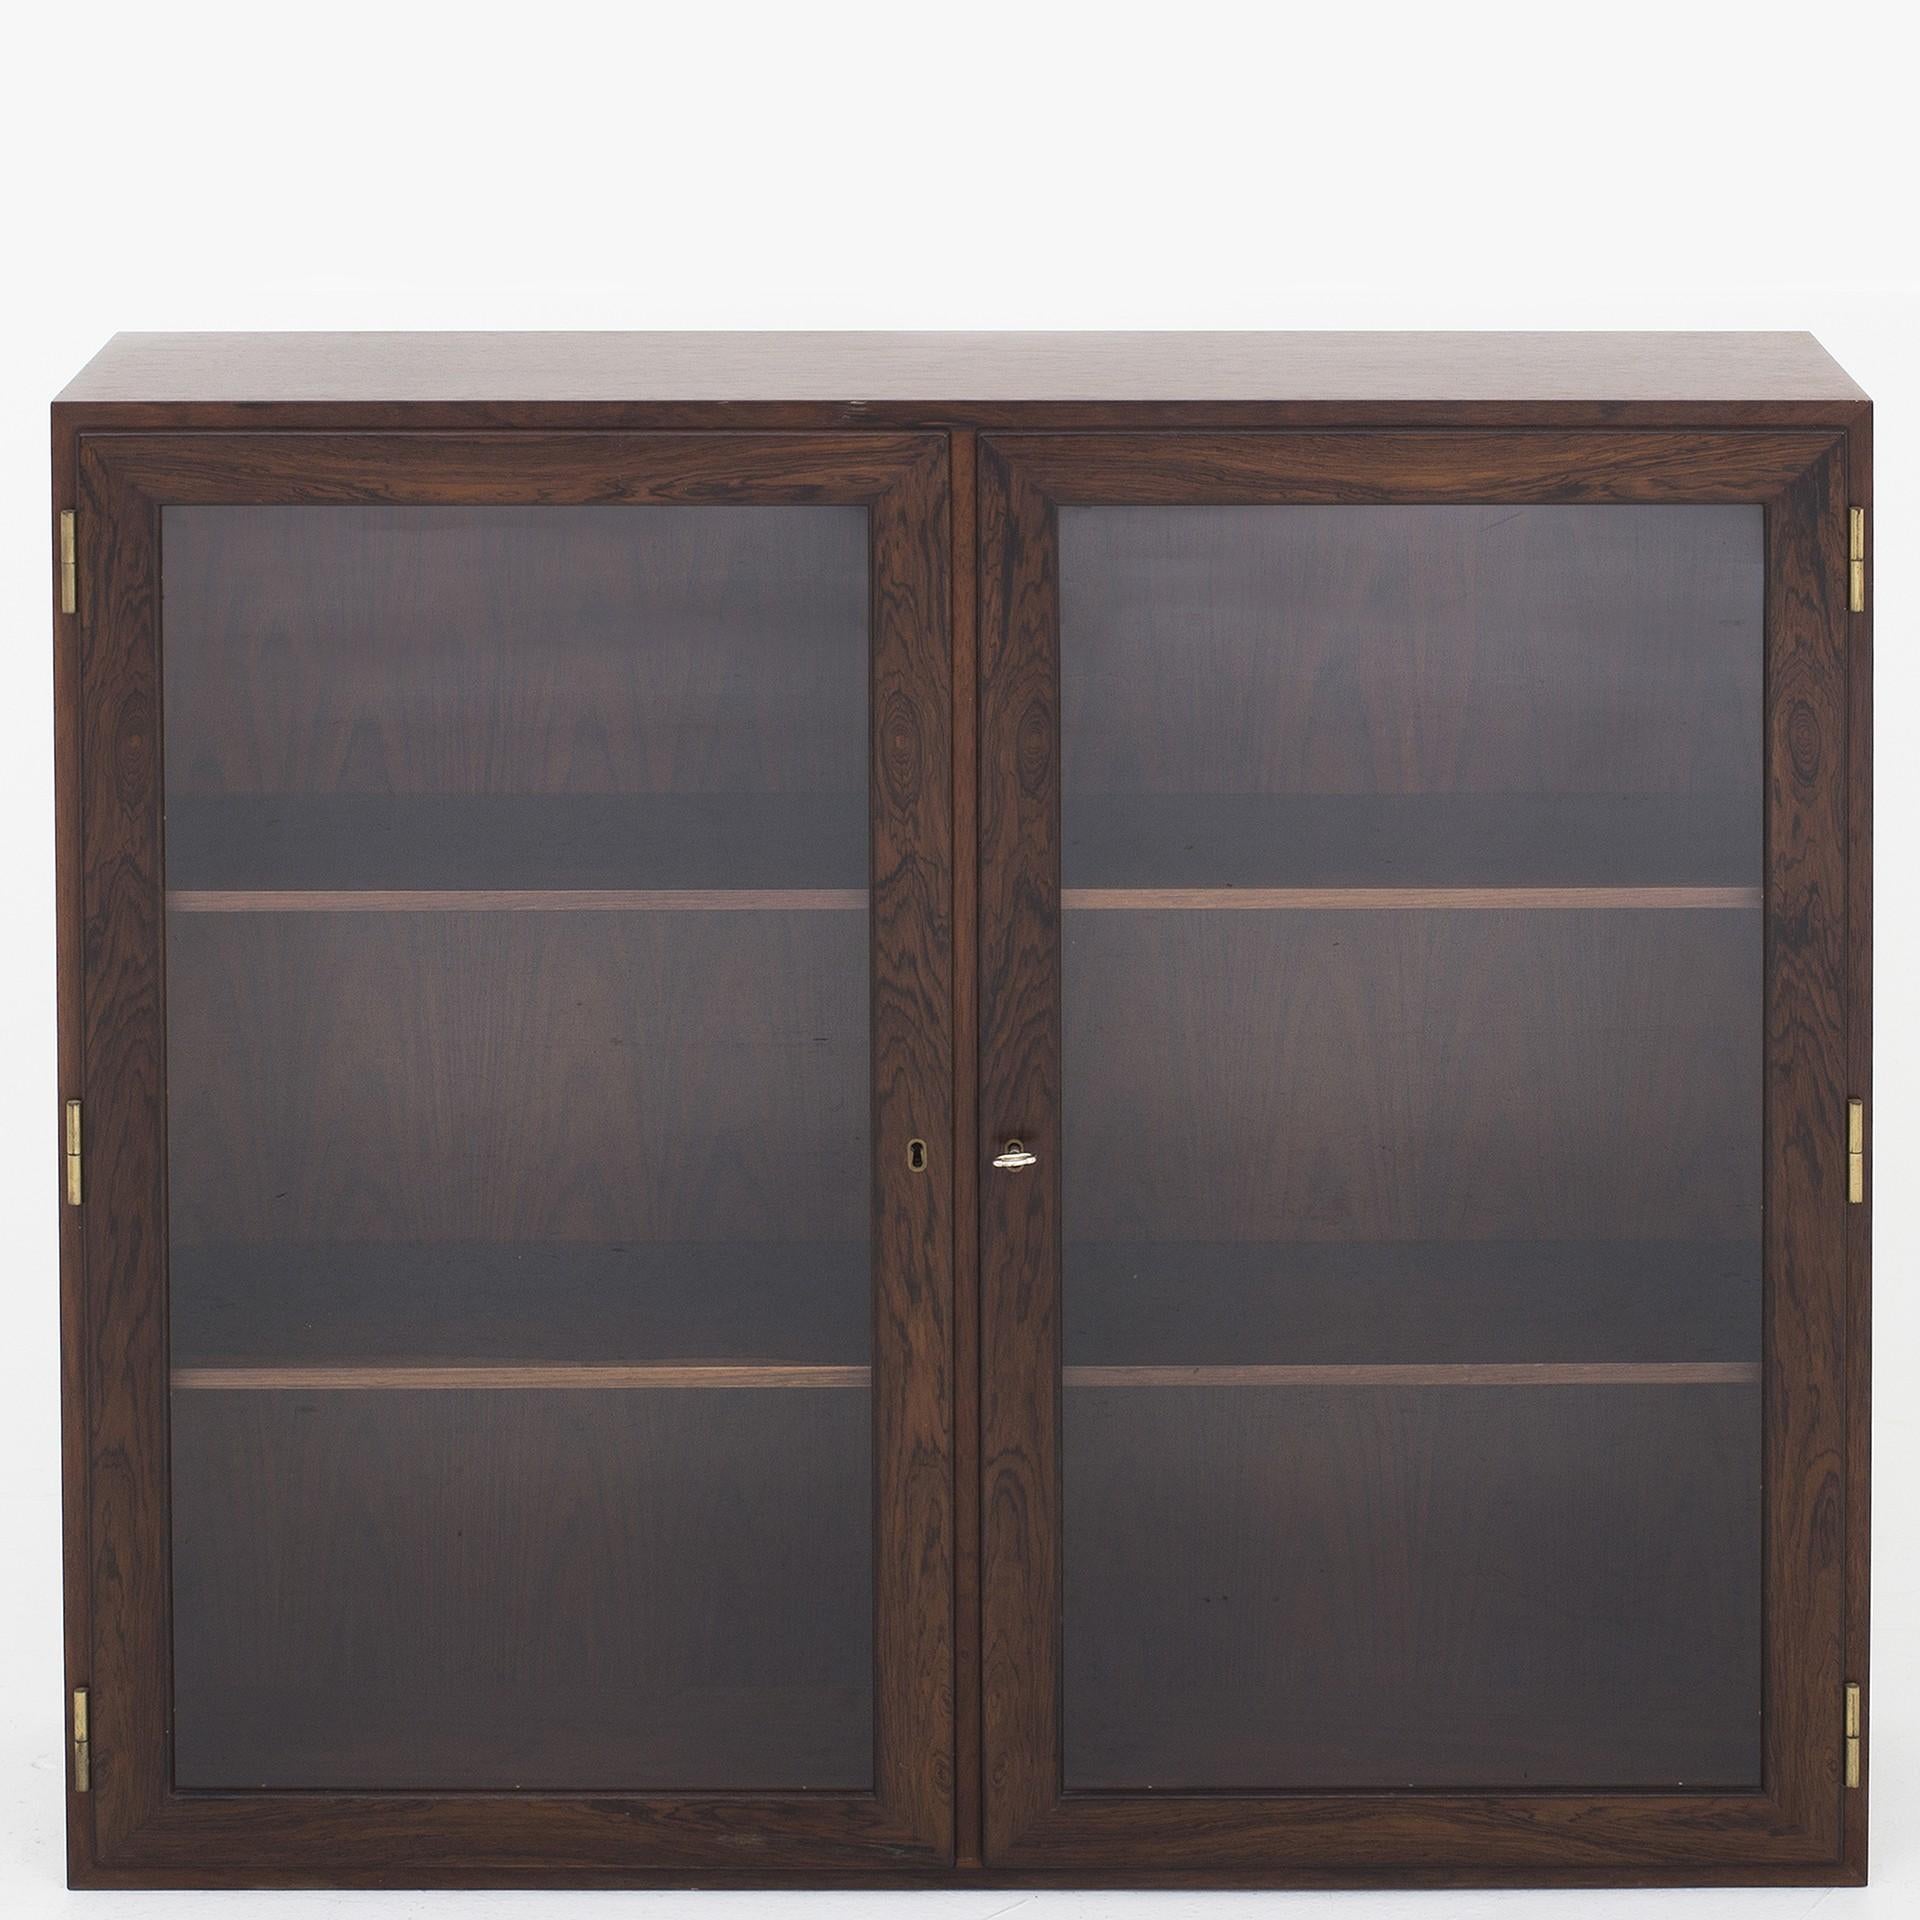 Bureau and display cabinet in rosewood. Maker P. Jeppesen.